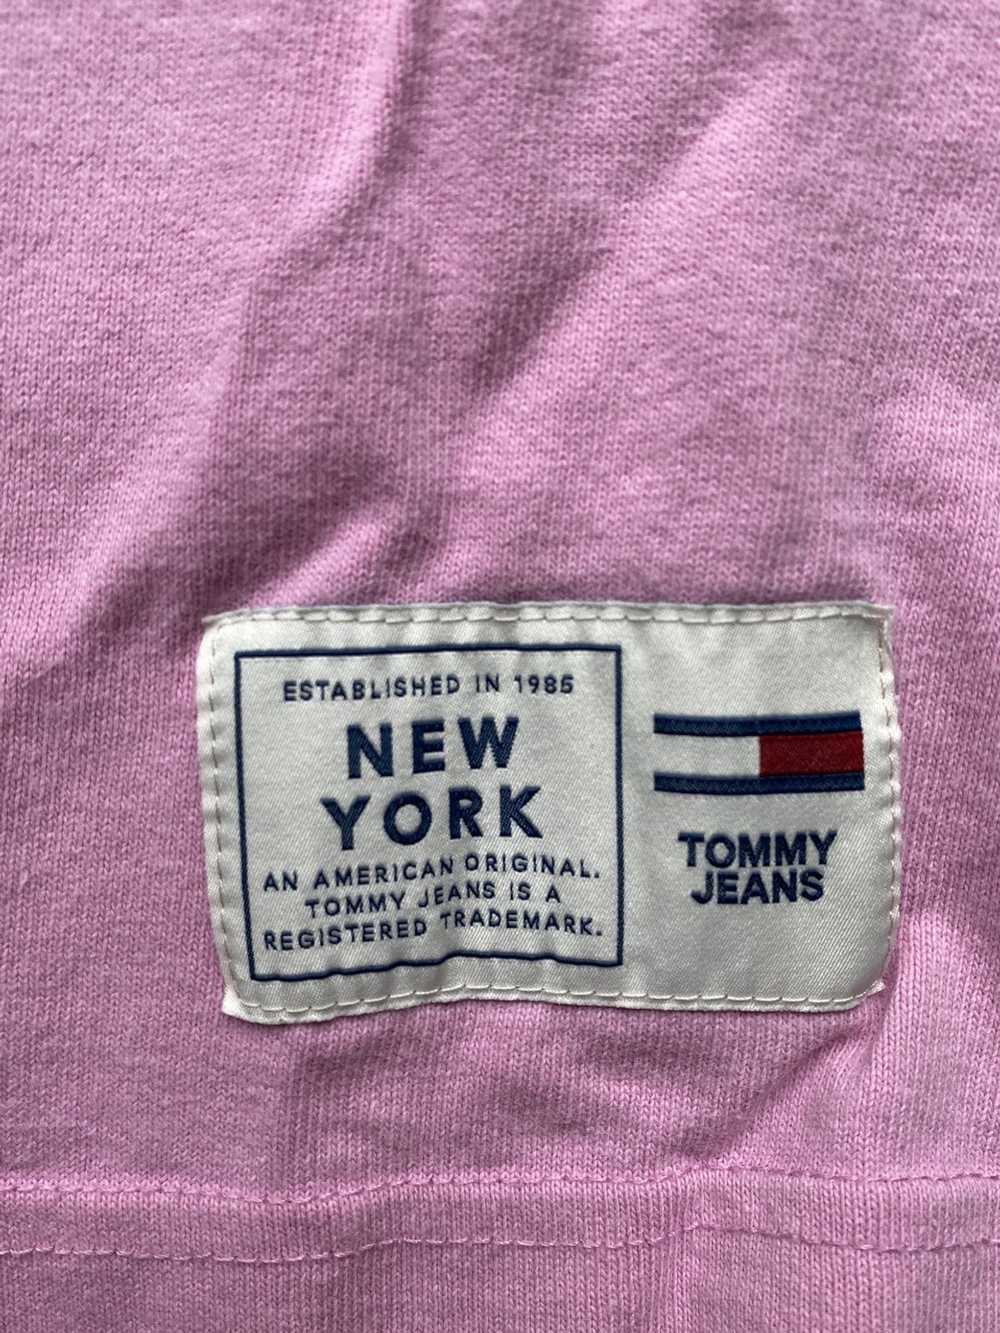 Tommy Jeans Tommy Jeans Pink Logo Tee - image 4